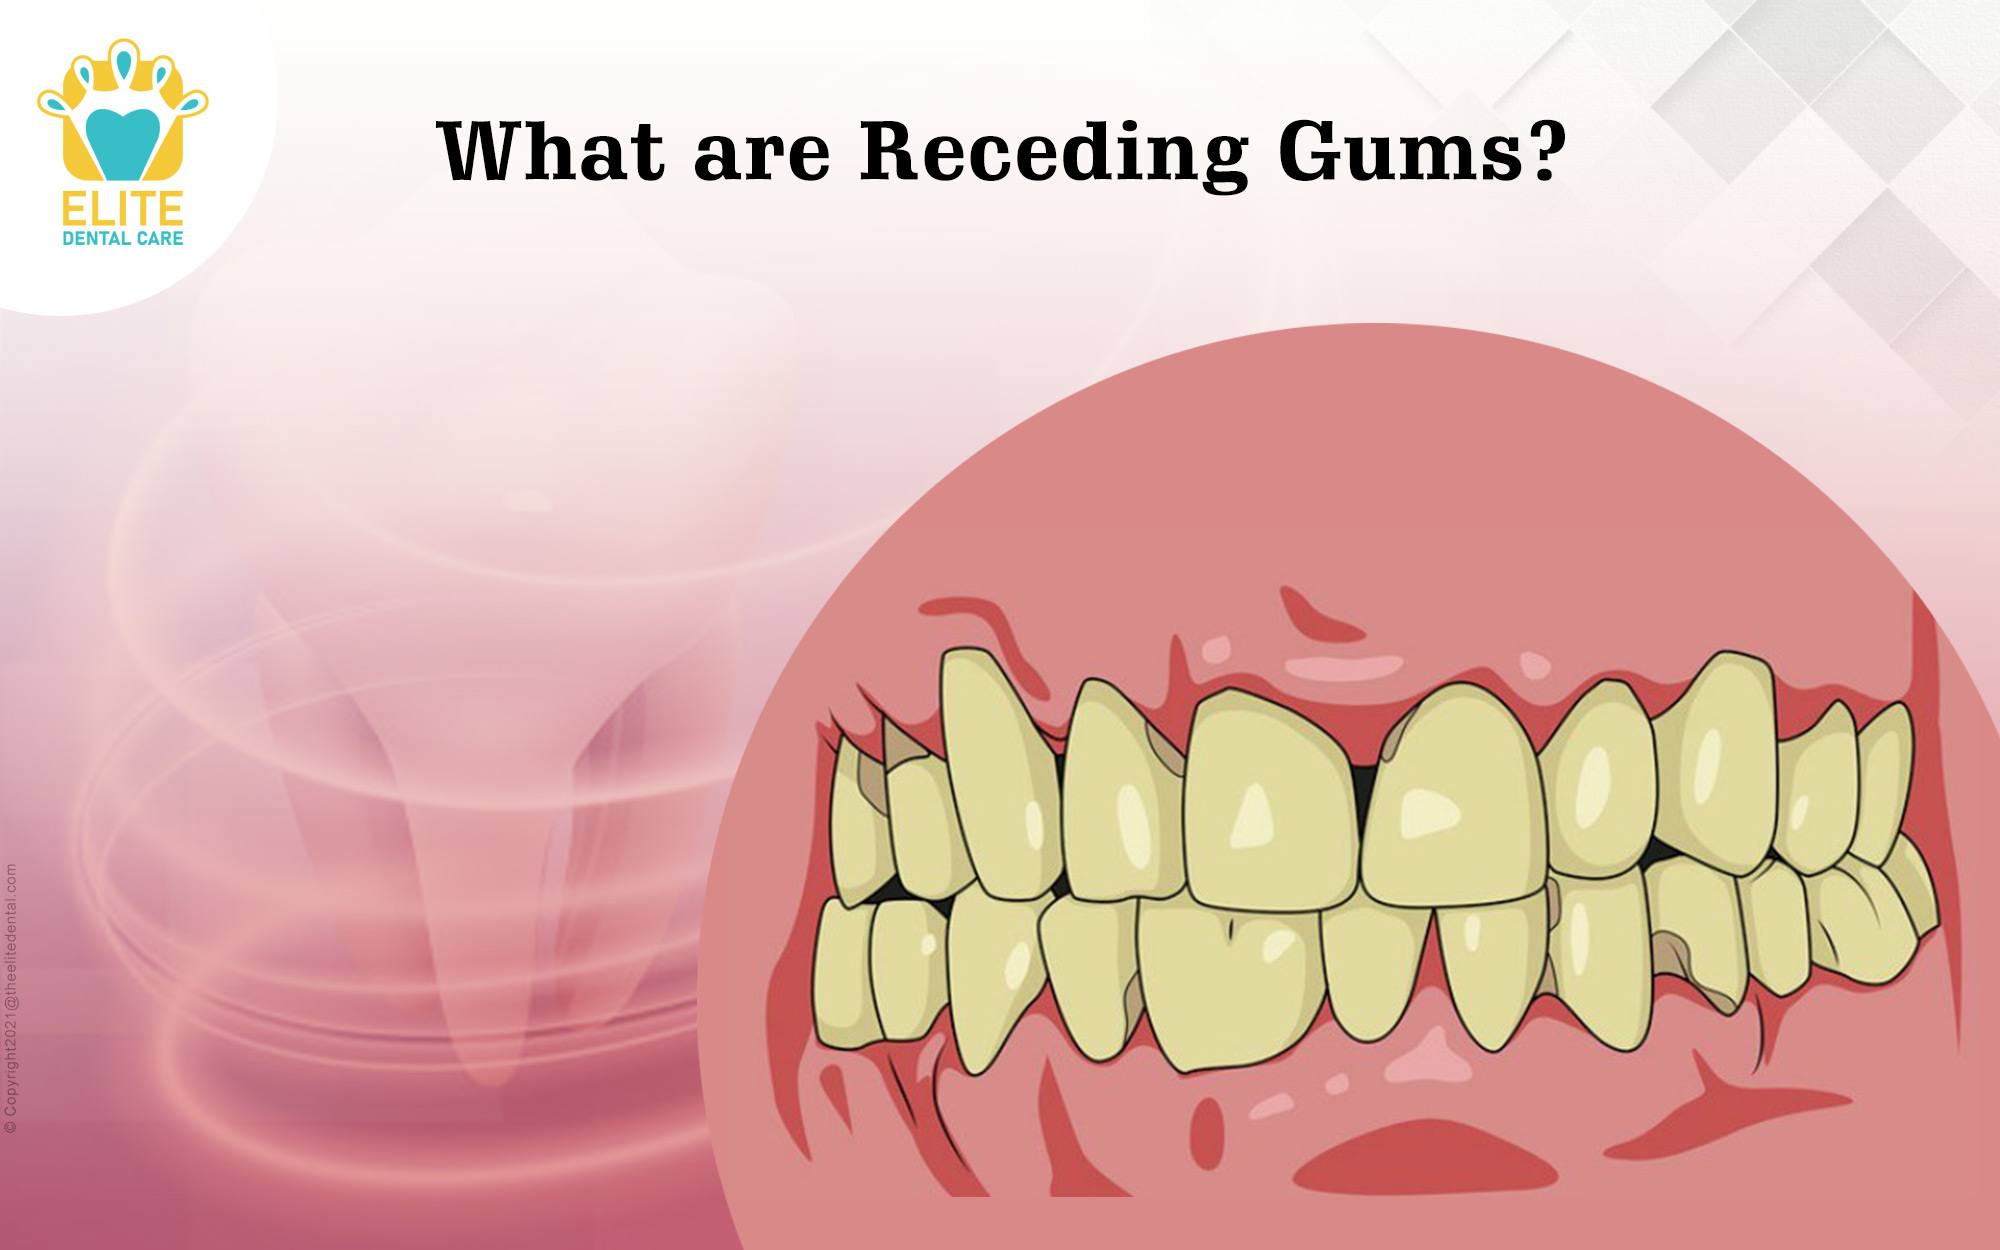 What are Receding Gums?